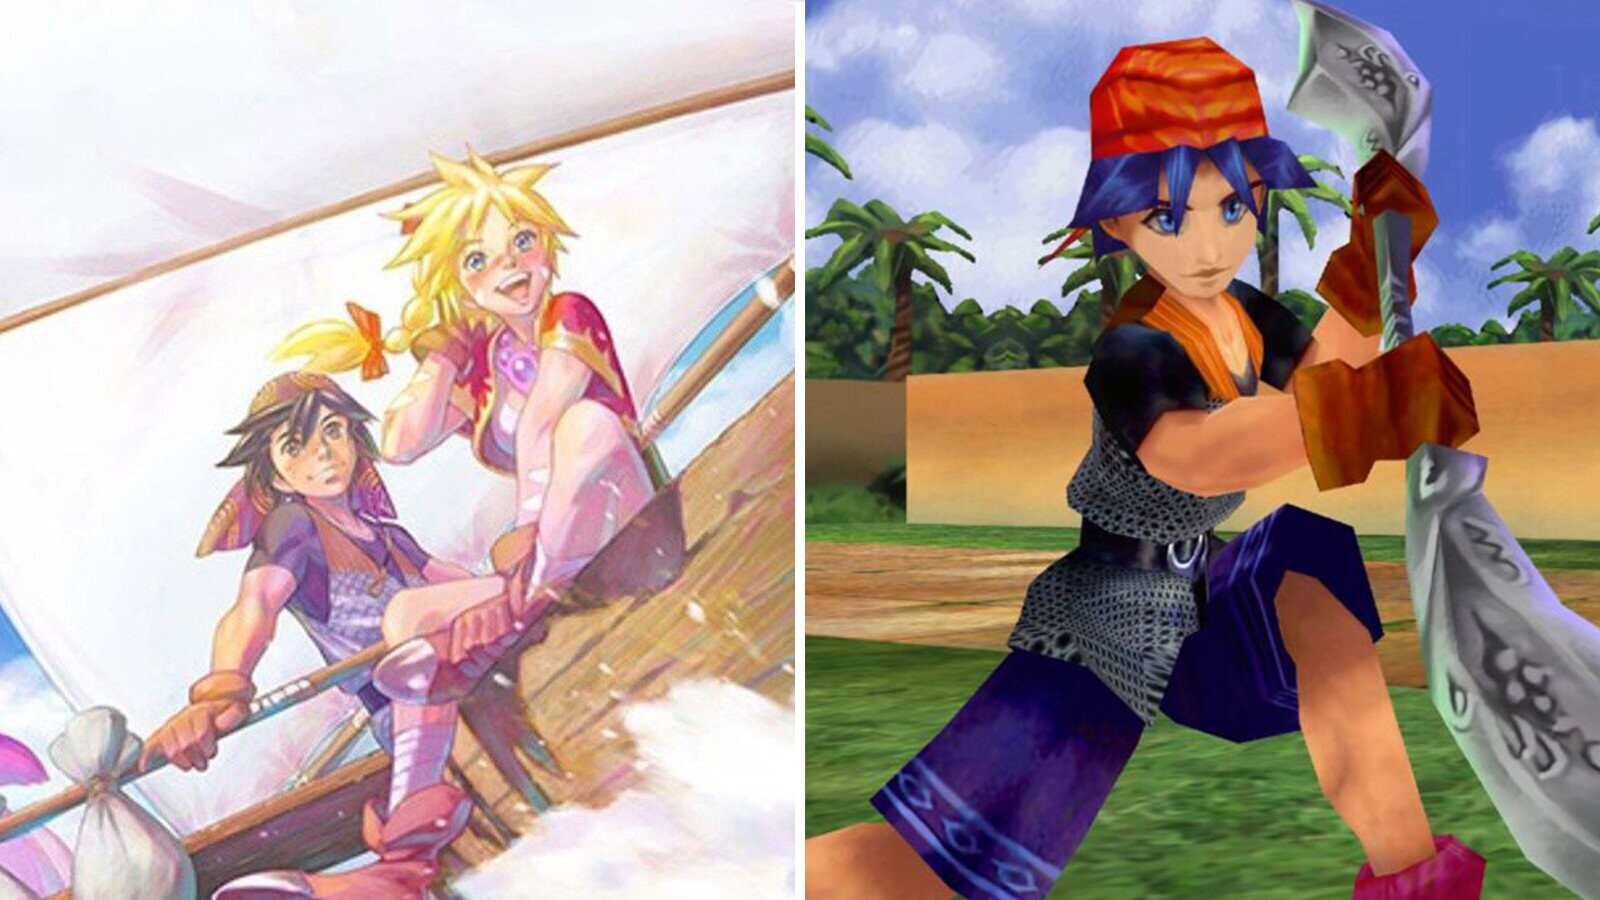 Chrono Cross was remastered because the devs feared the classic